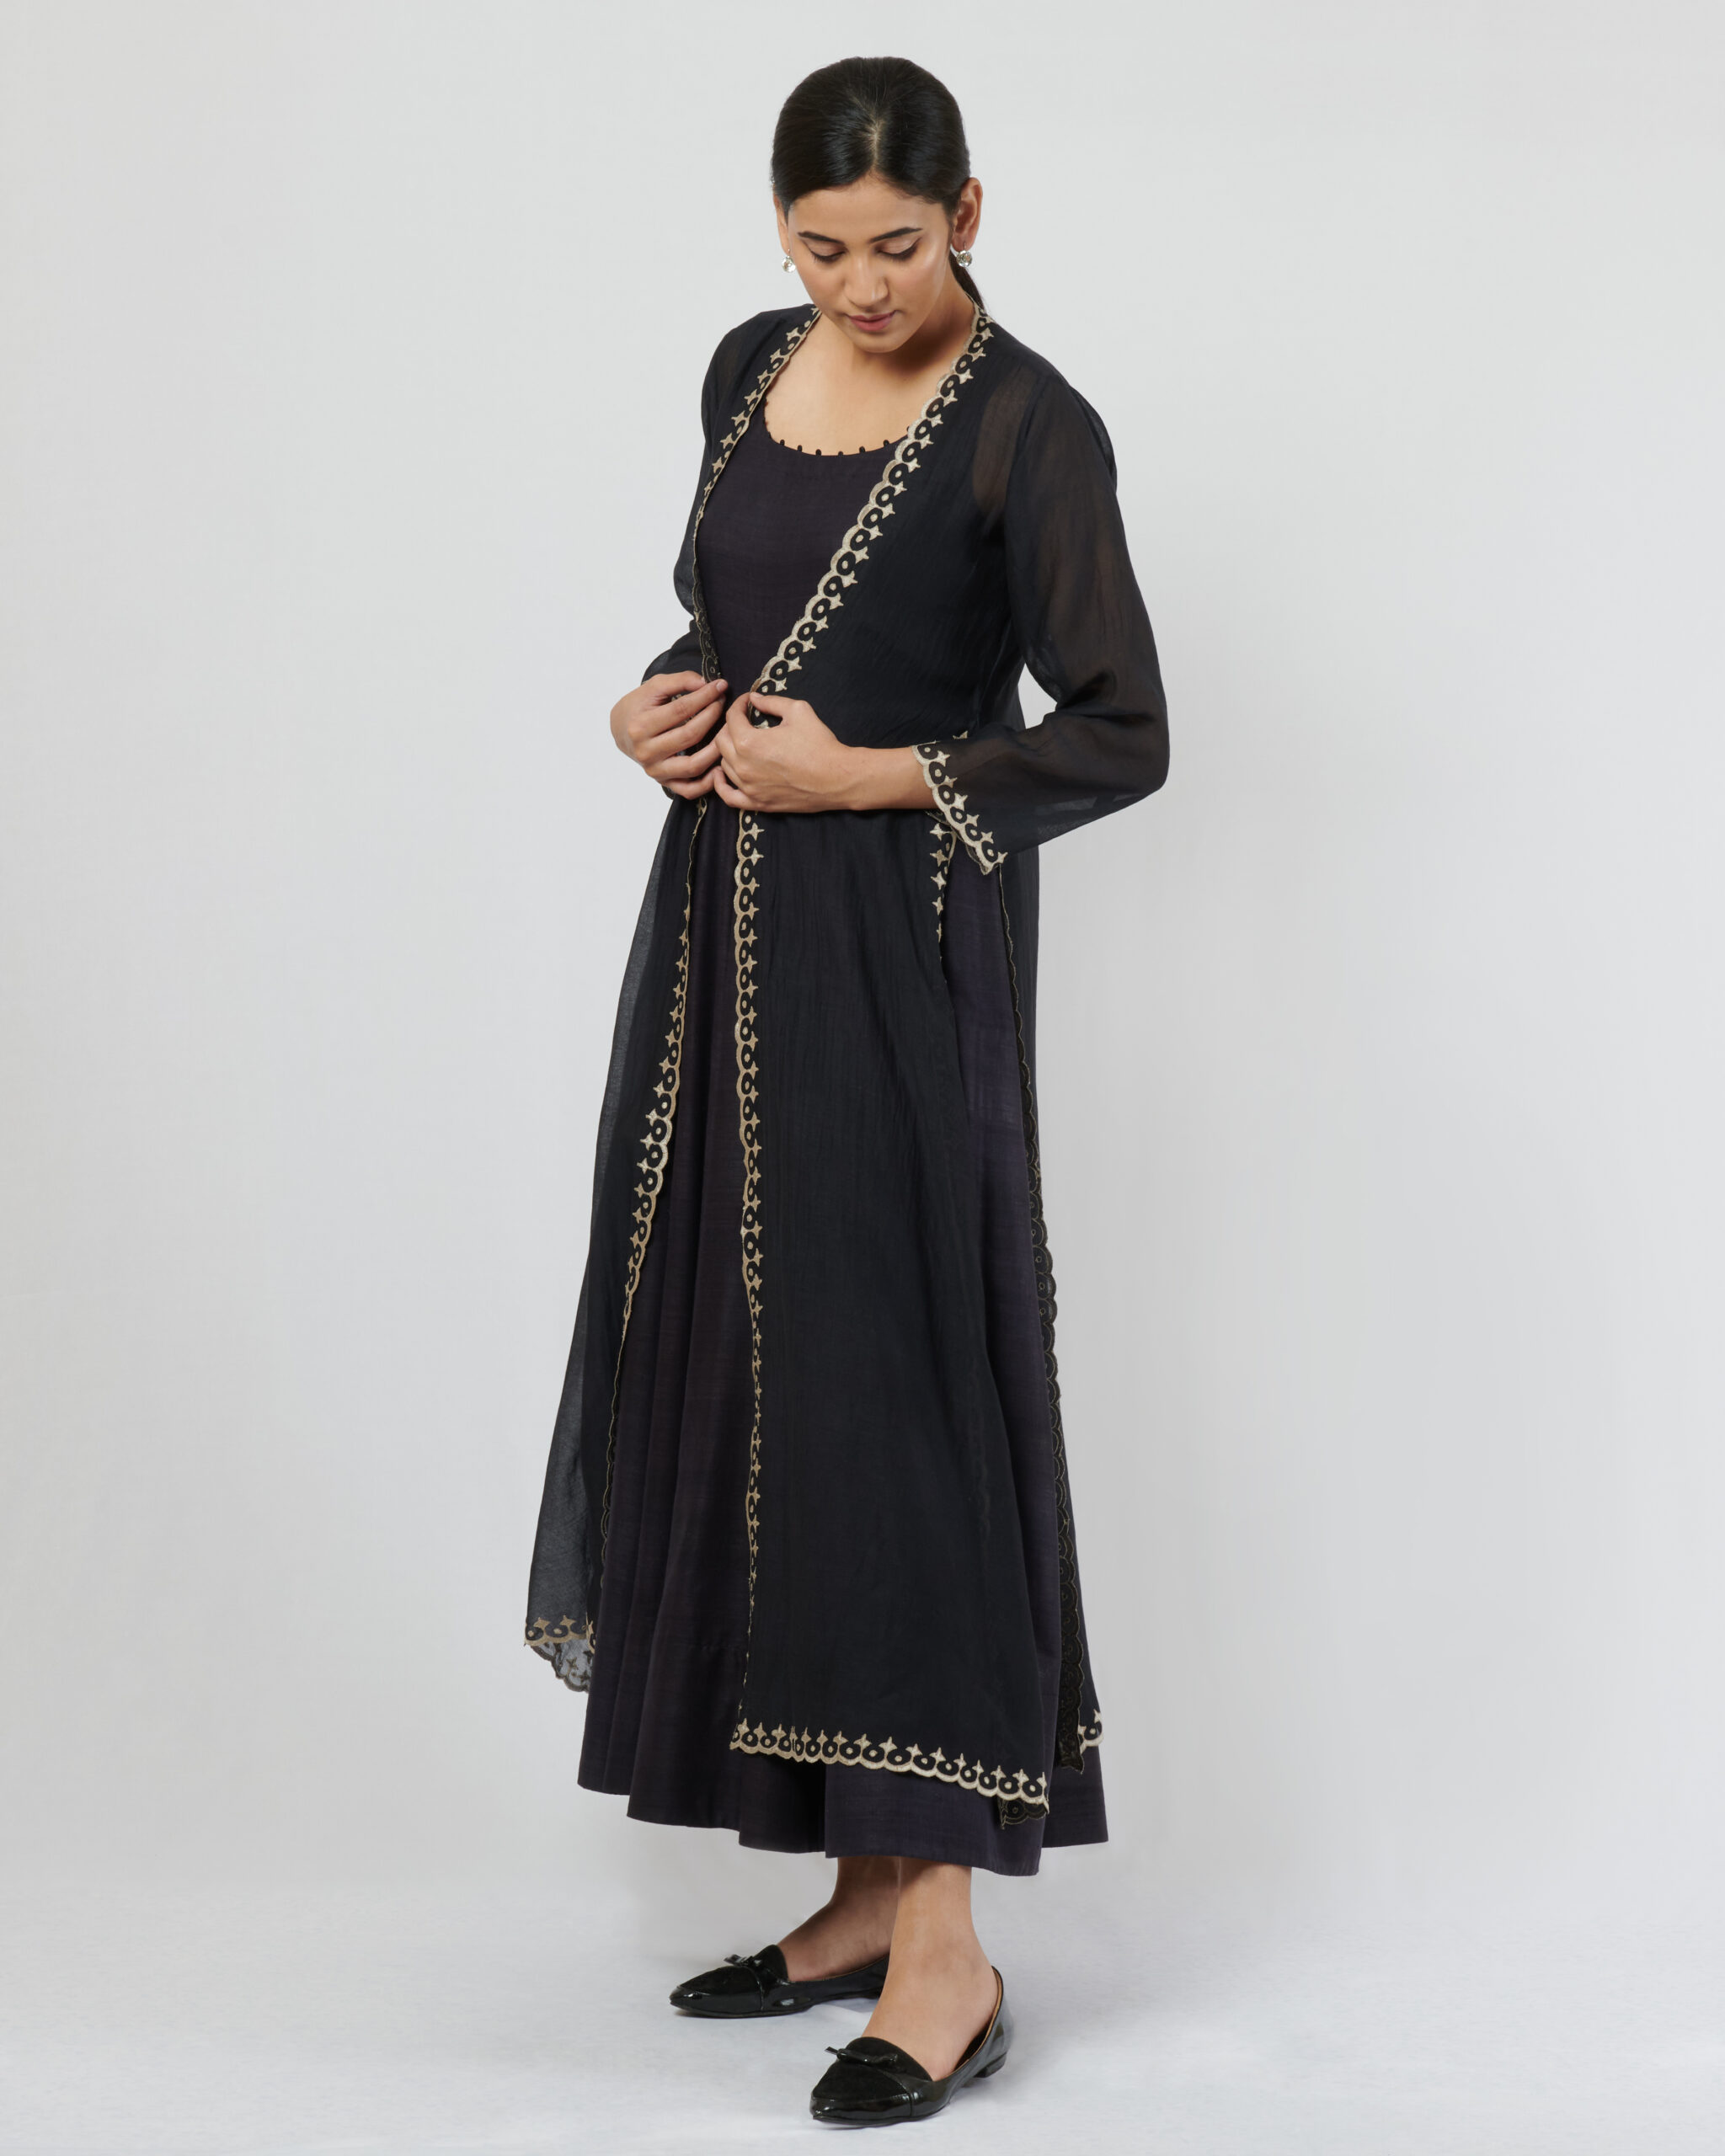 Black long jacket with silver kanchi tissue applique and cutwork detail